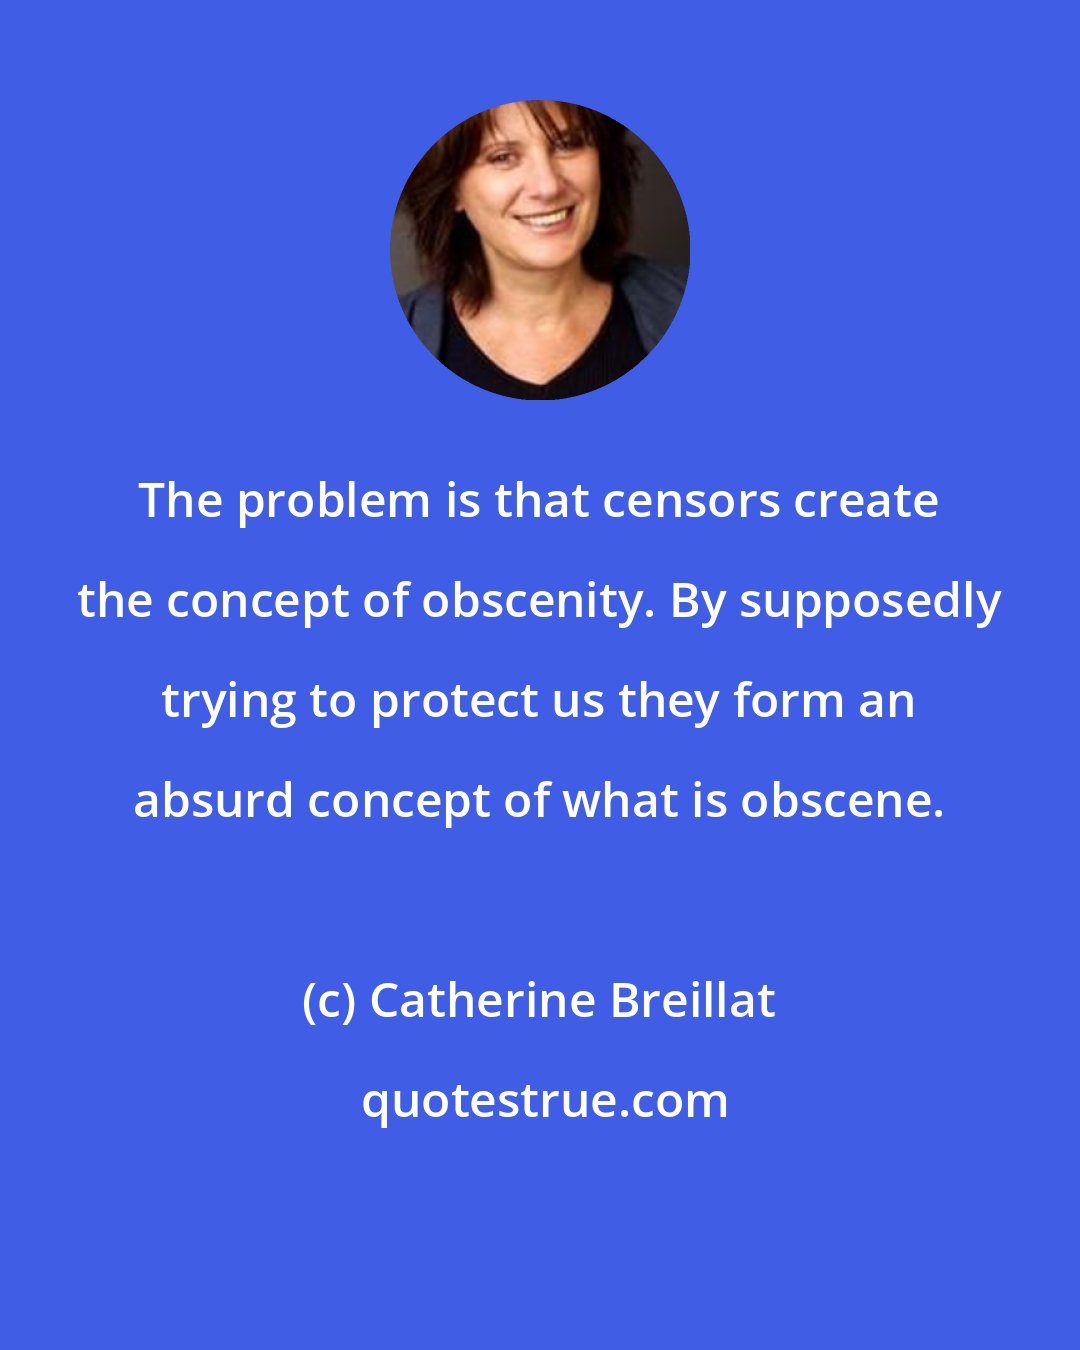 Catherine Breillat: The problem is that censors create the concept of obscenity. By supposedly trying to protect us they form an absurd concept of what is obscene.